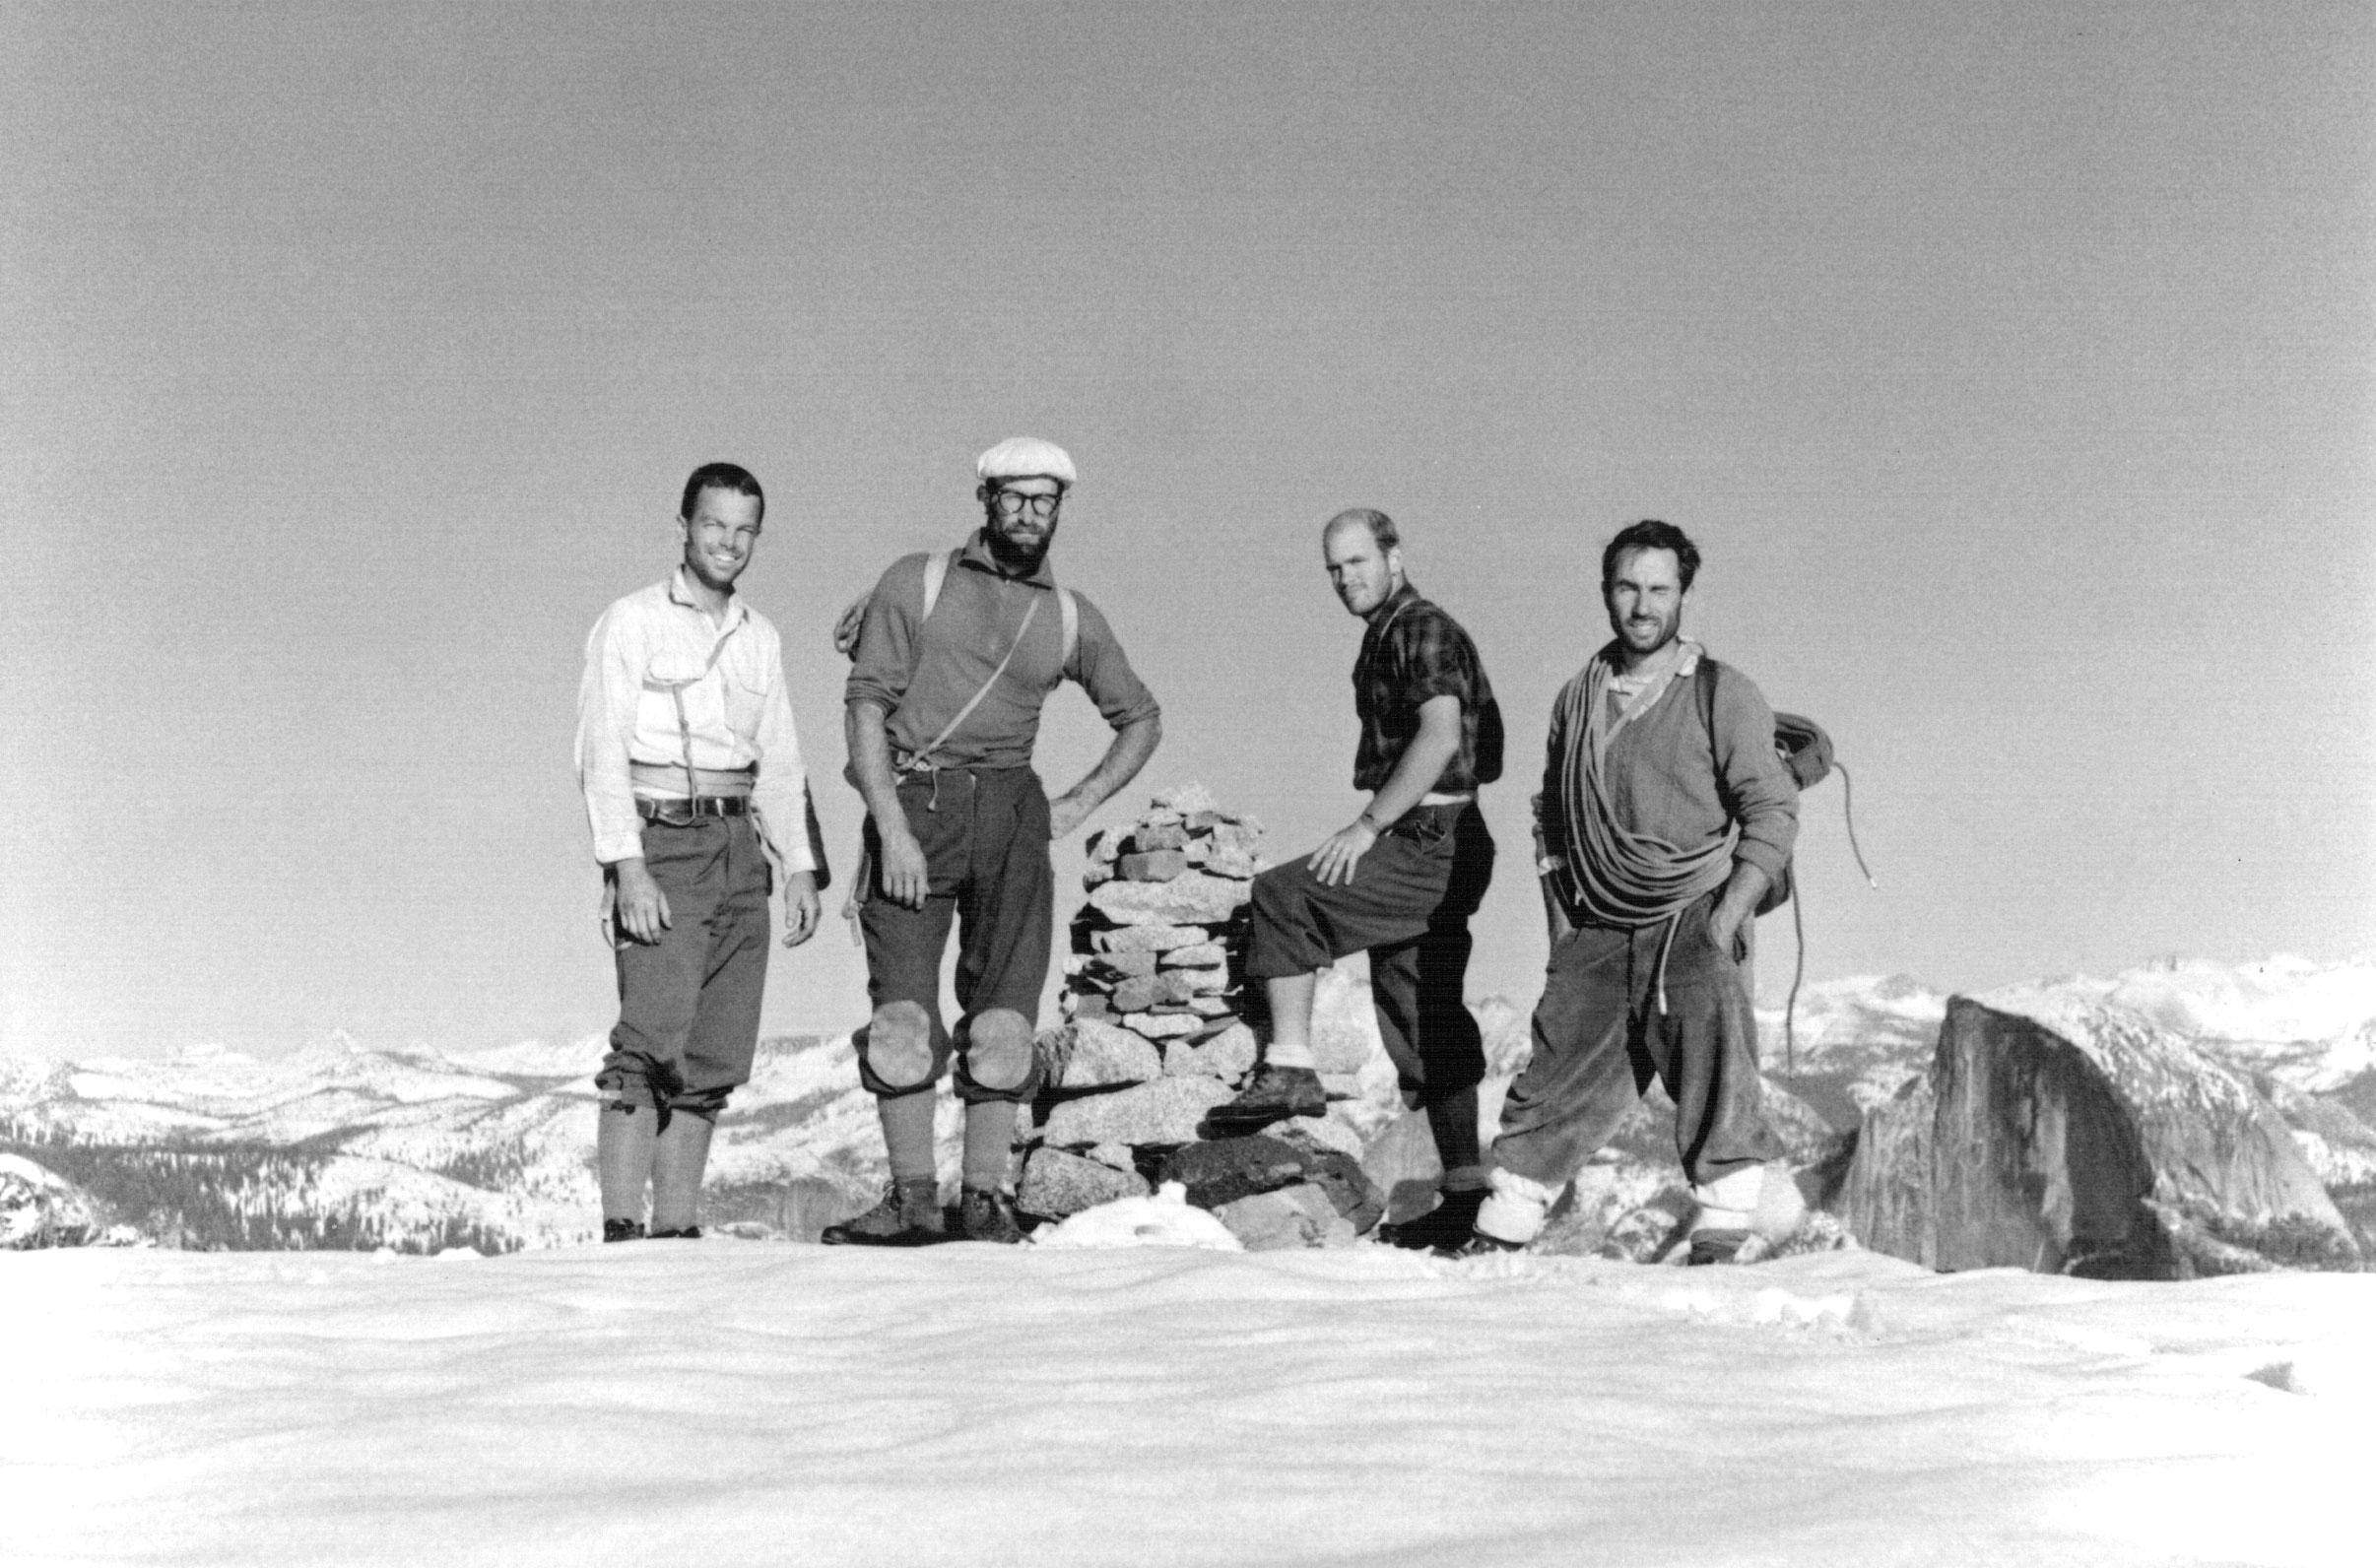 Tom Frost, Royal Robbins, Chuck Pratt, and Yvon Chouinard pose for a legendary photo atop El Capitan after their ascent of the North American Wall in ‘64. Yosemite, California, USA